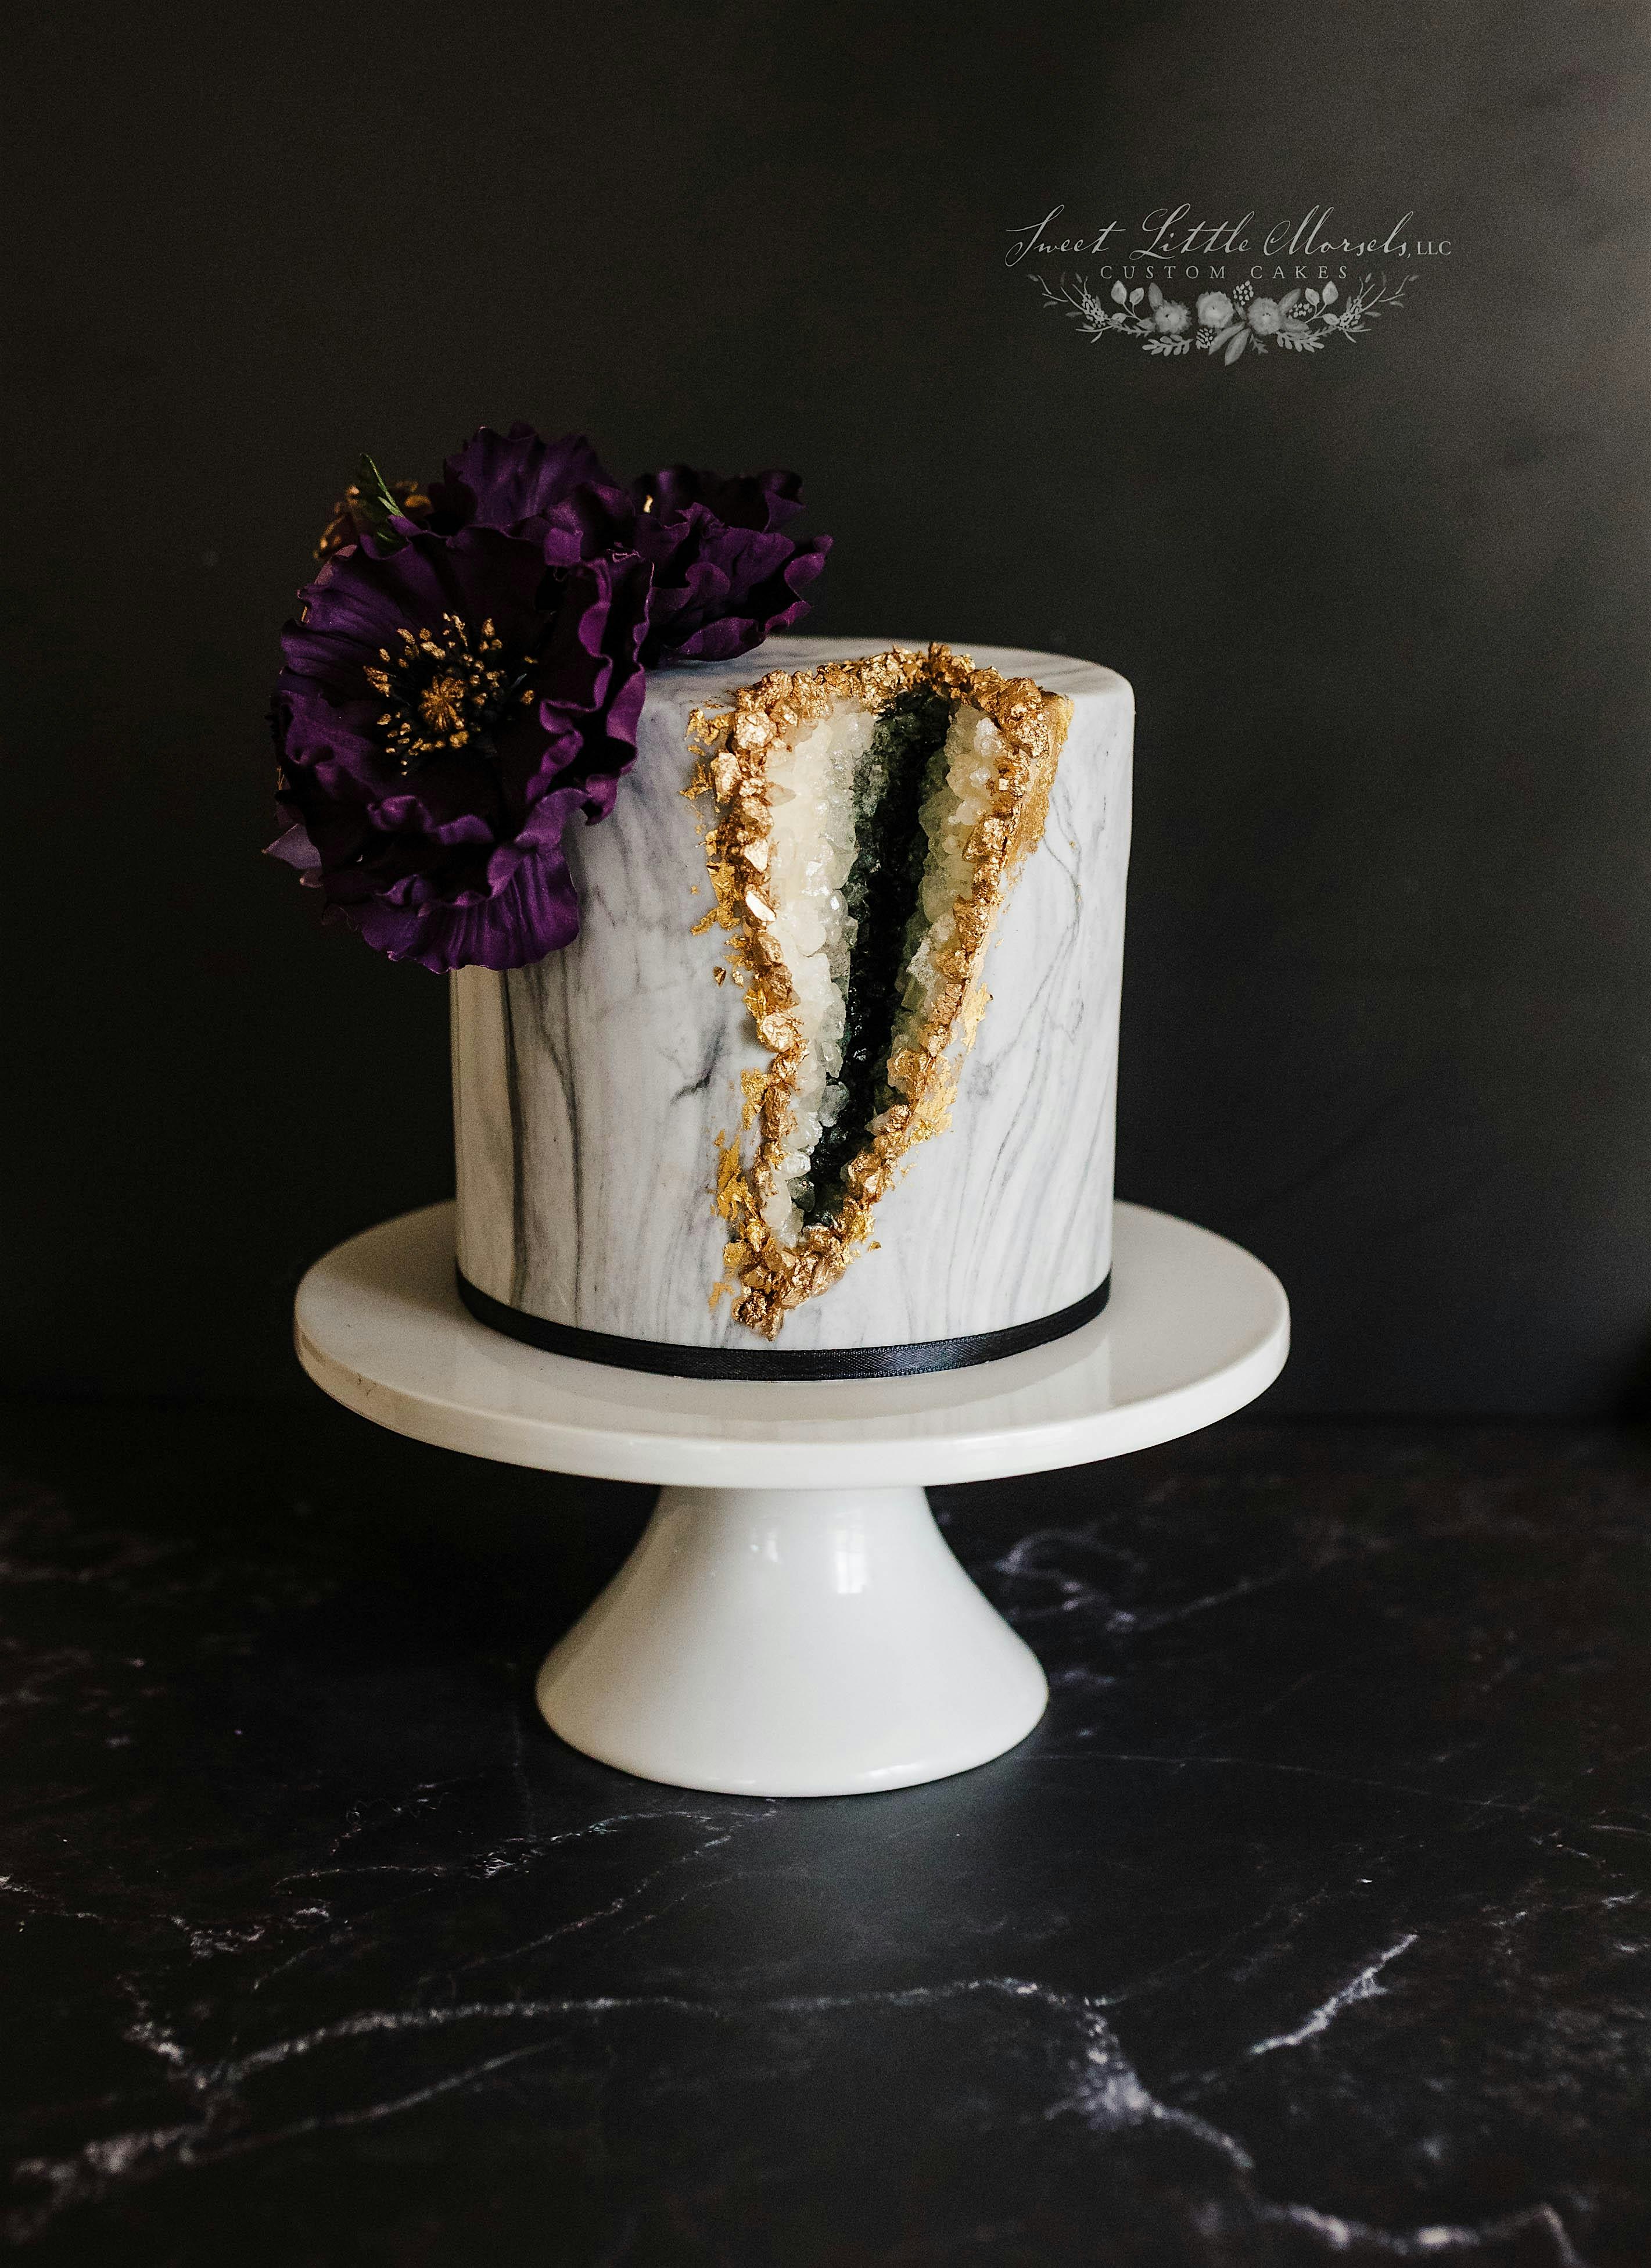 Black, White And Gold Fondant And Buttercream Cake : r/Cakes